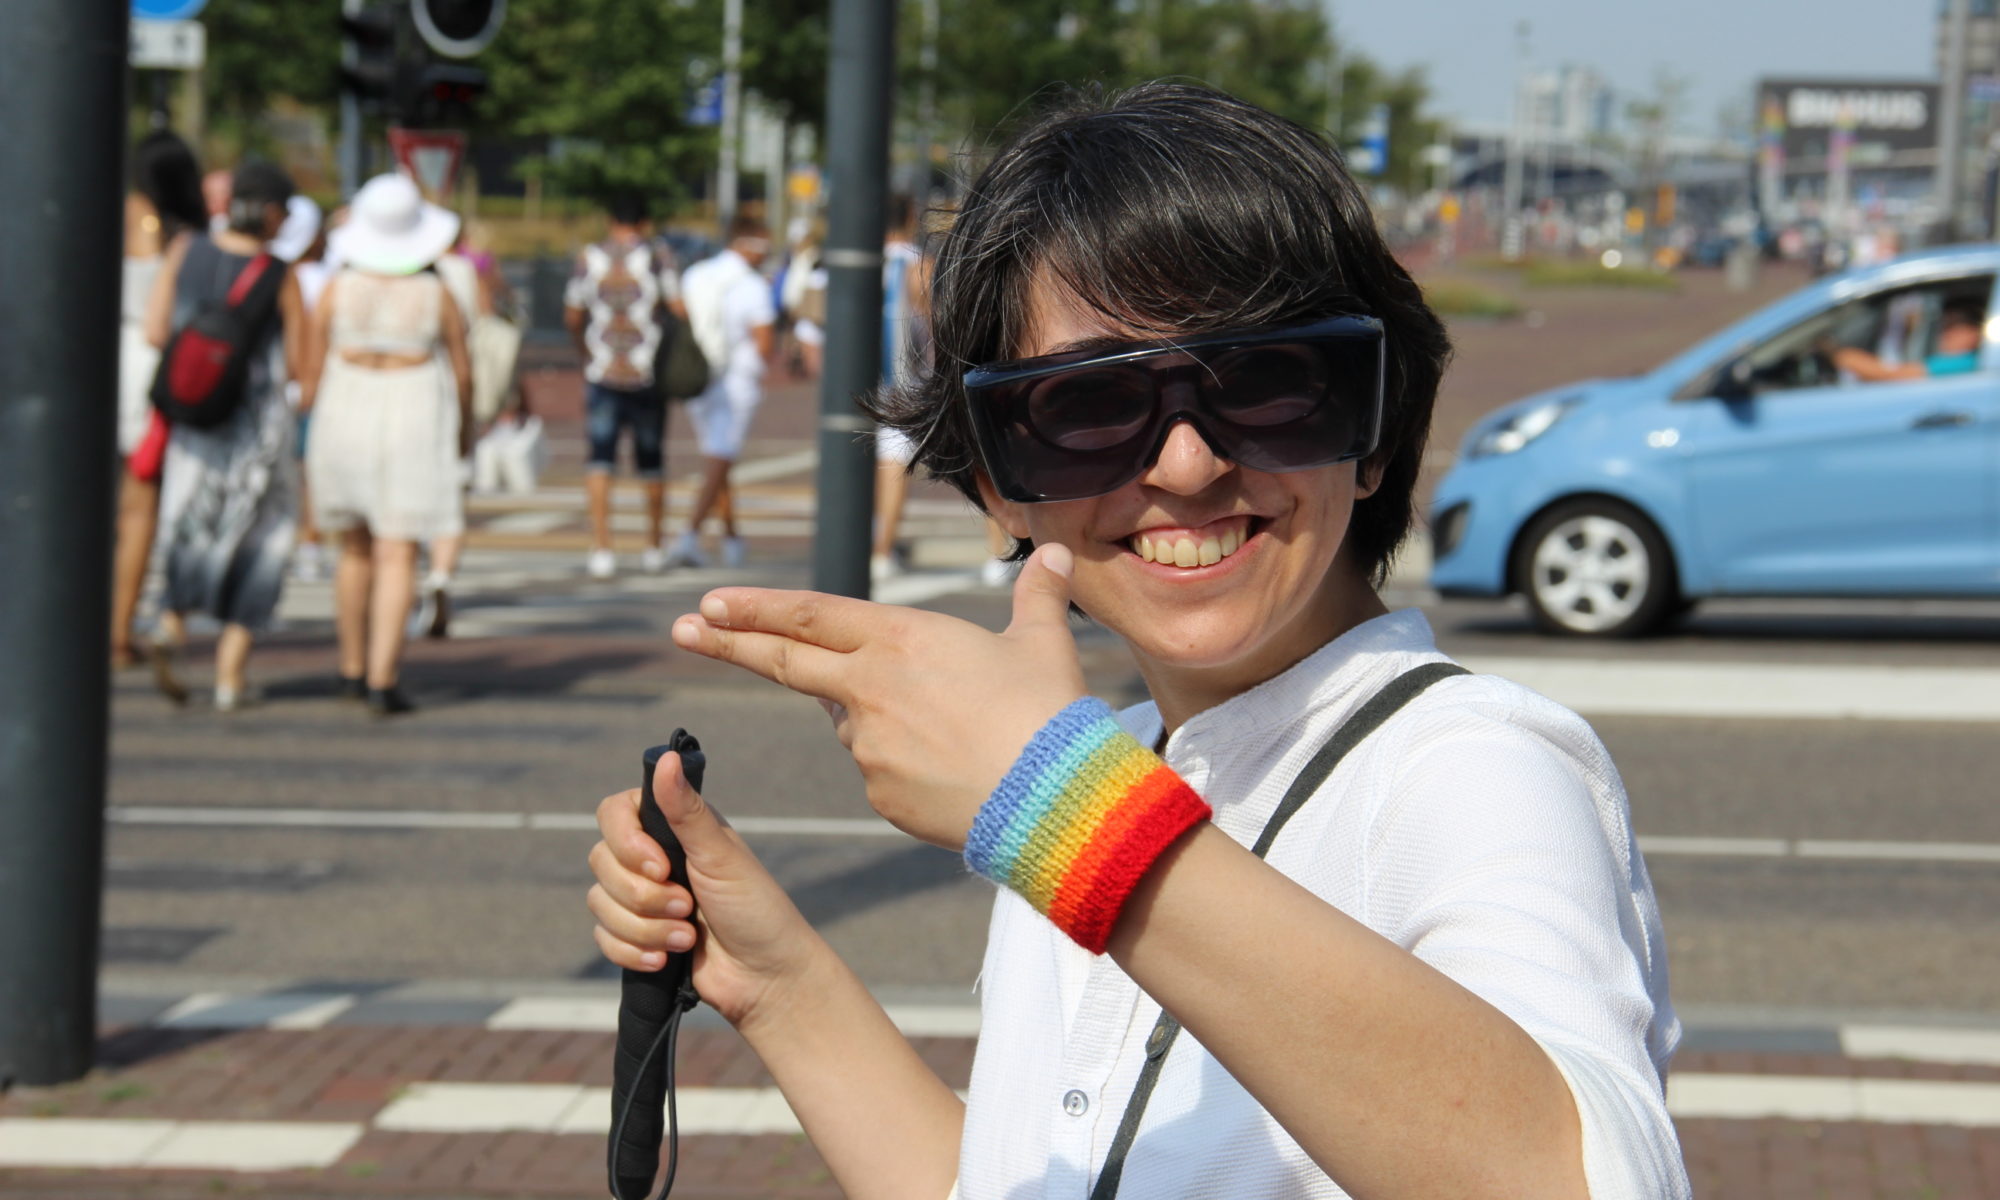 Elham Malekpoor on the way to Iran Boat in Amsterdam Pride 2018